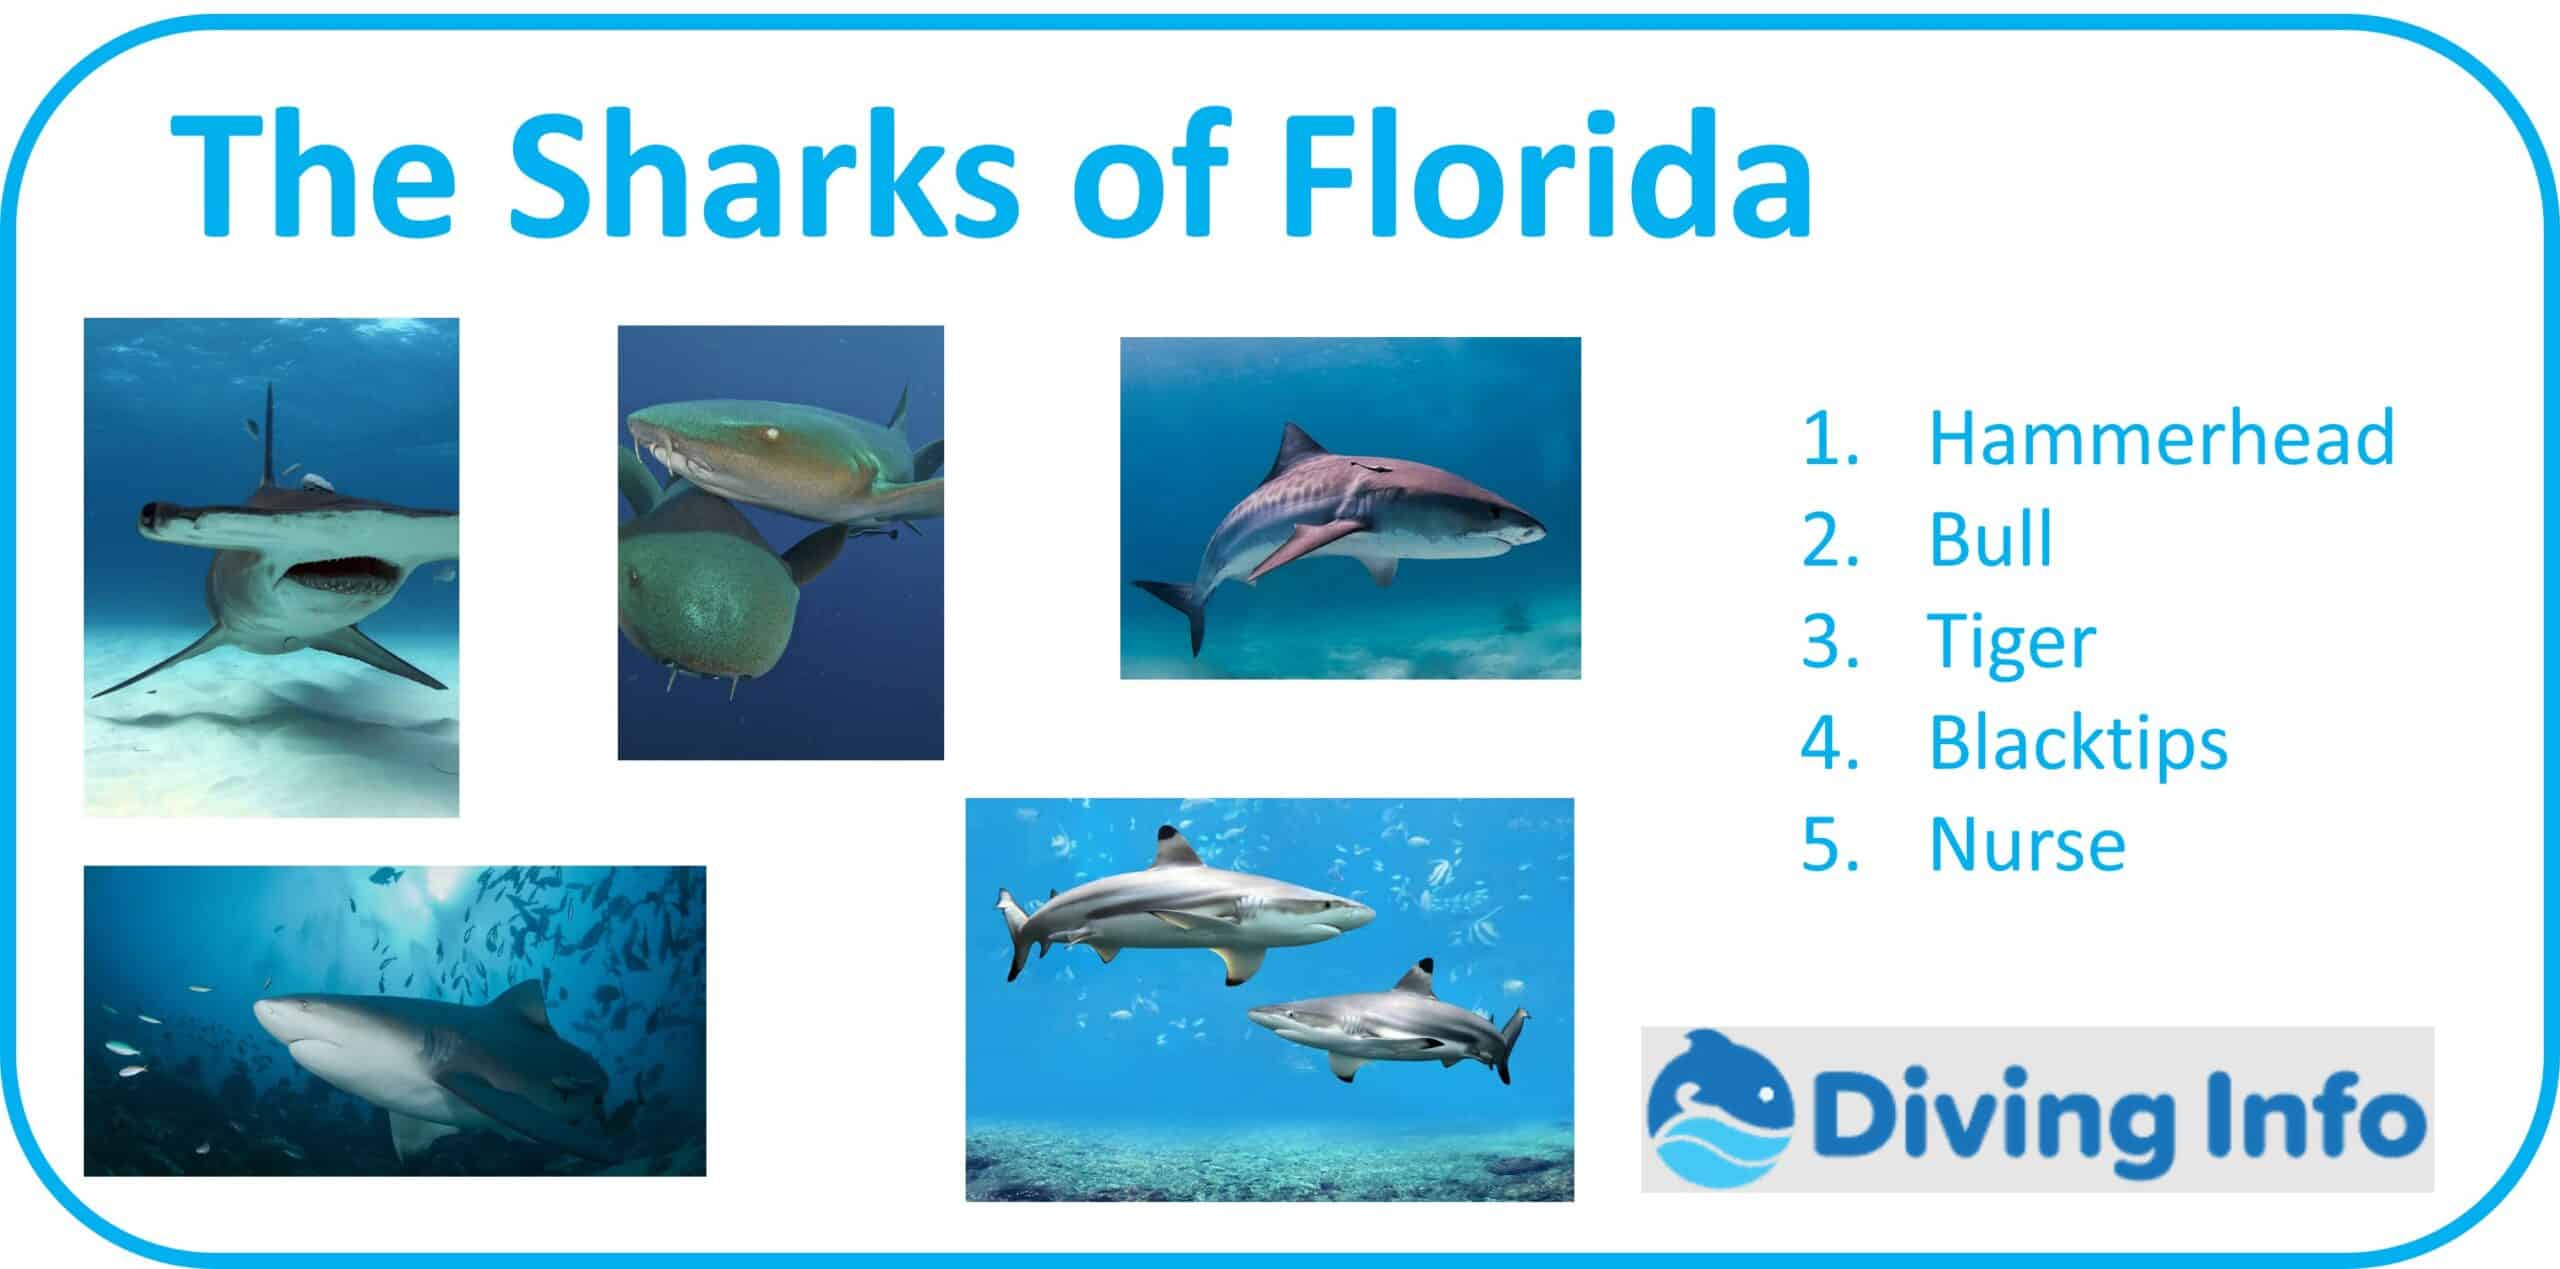 The Sharks of Florida